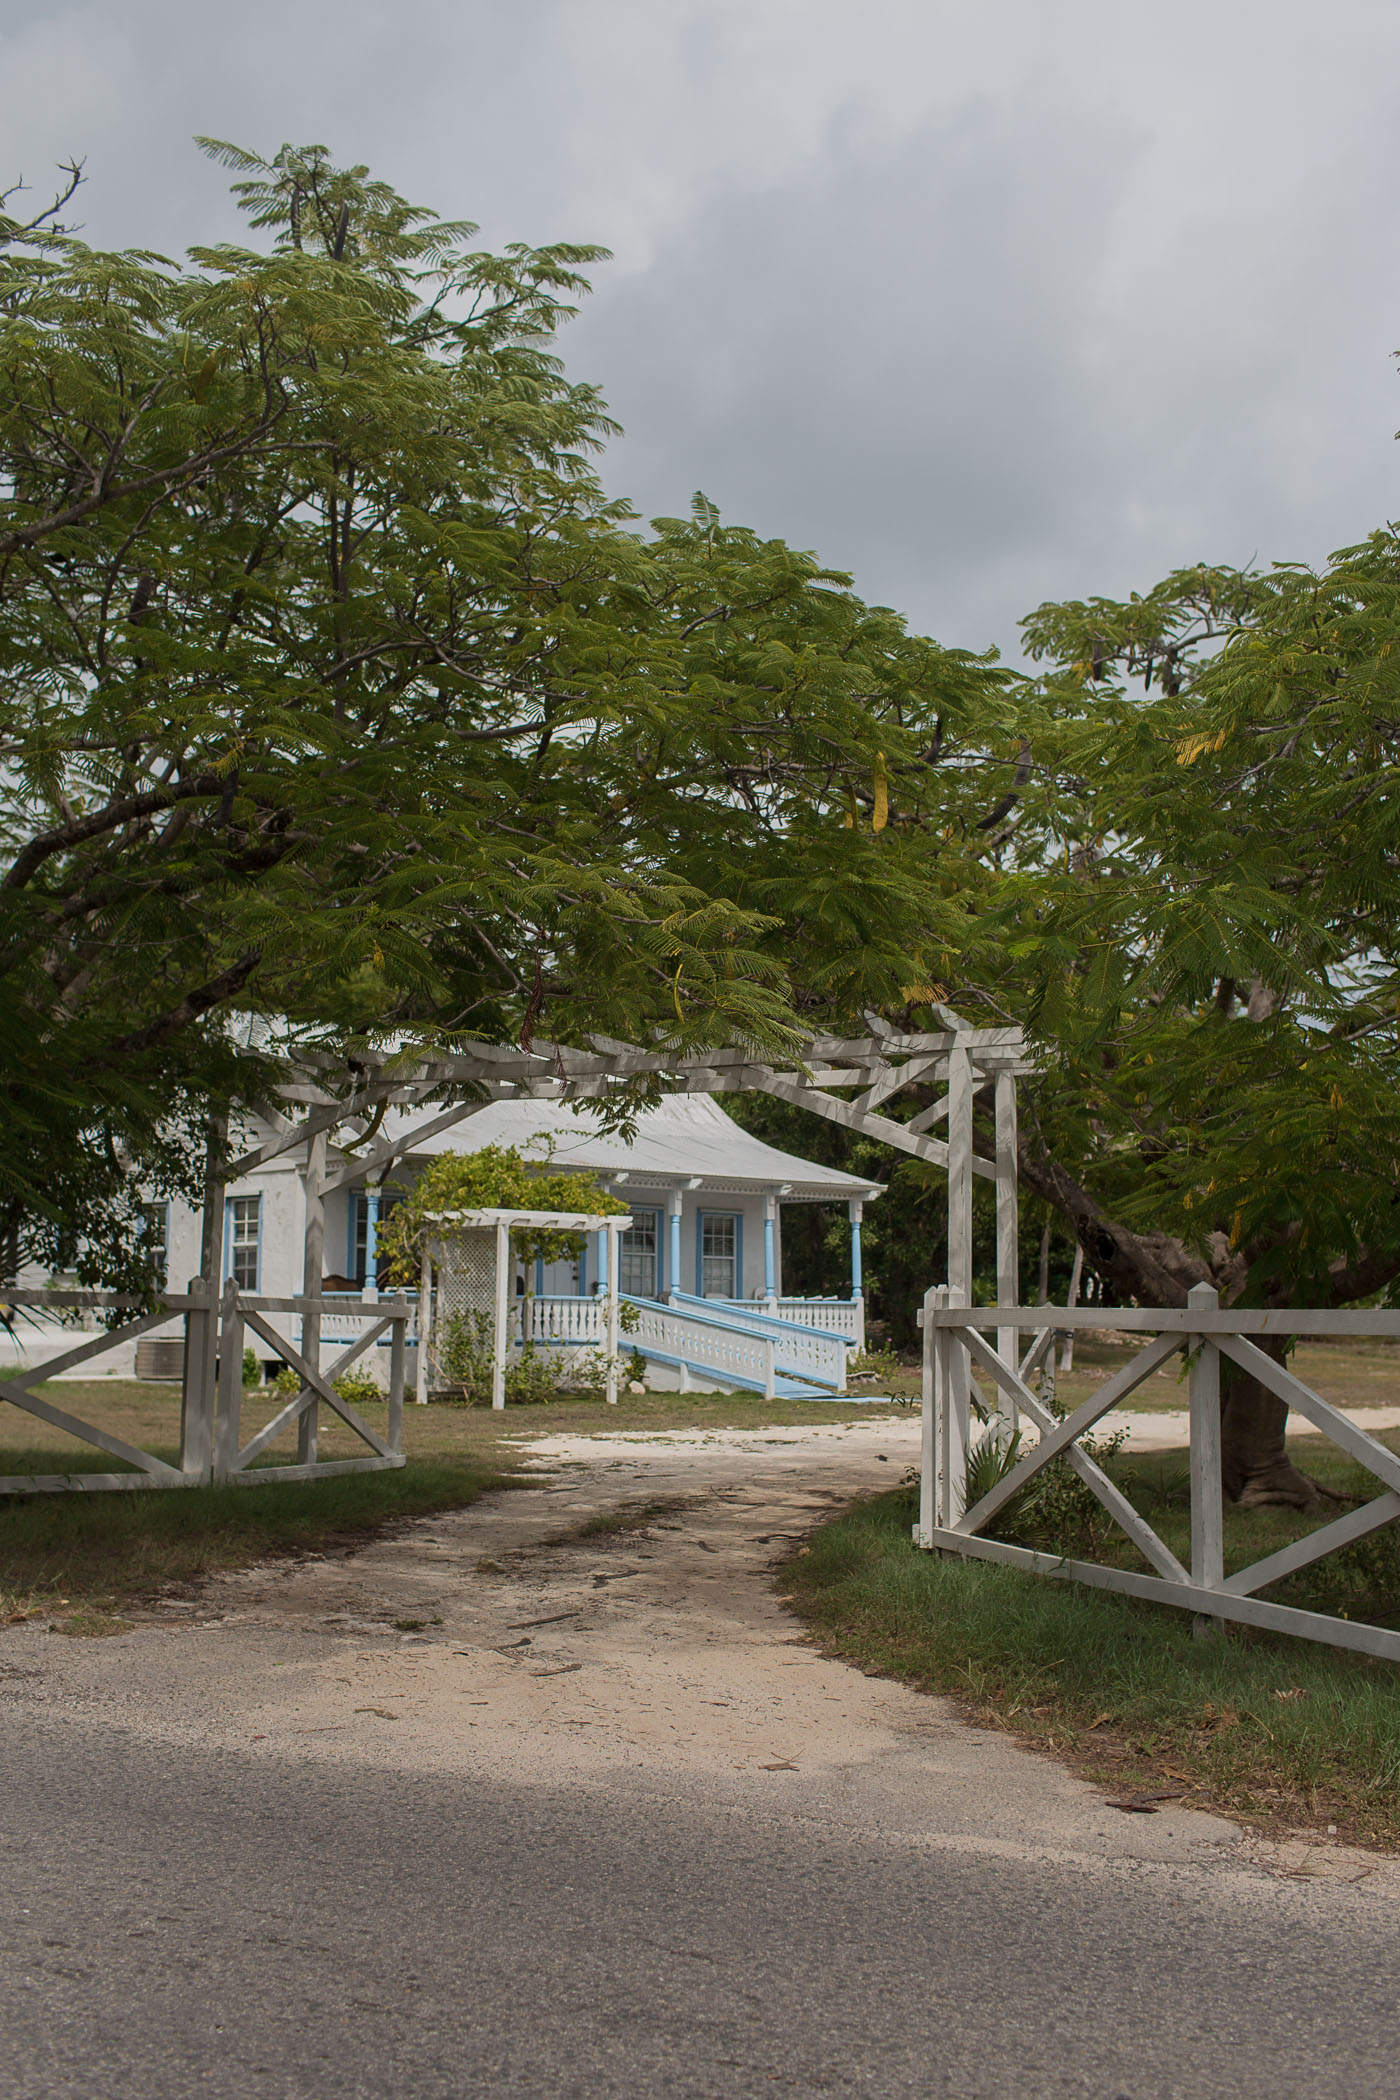 Old Caymanian House, over 100 years old.